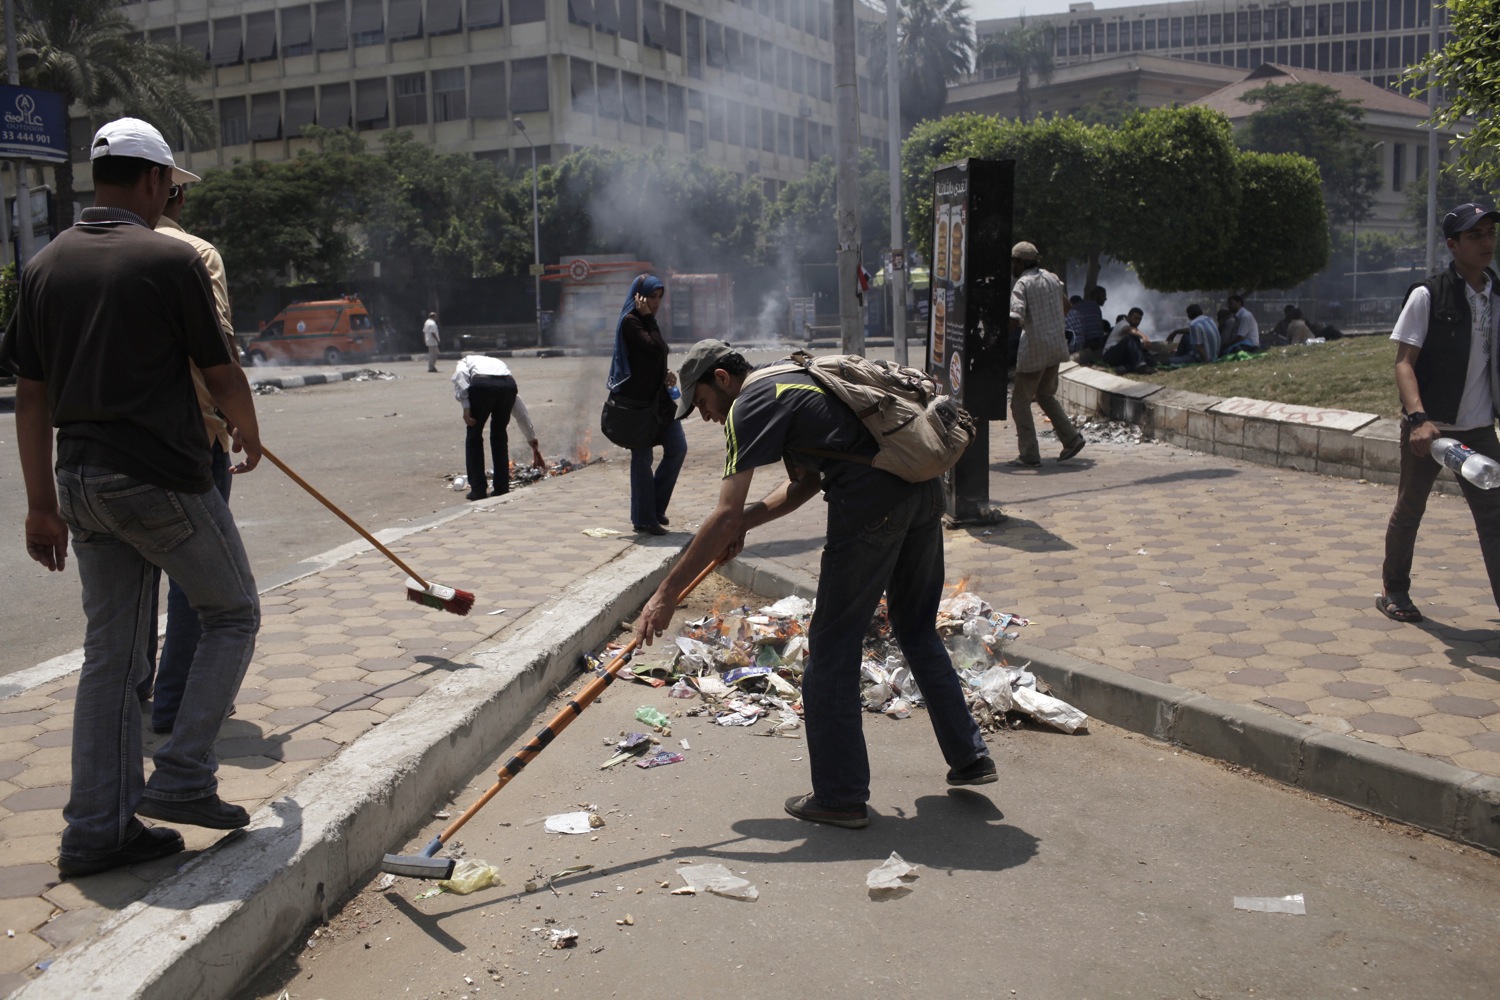 Egypt Protests Intensify As Army Deadline Approaches